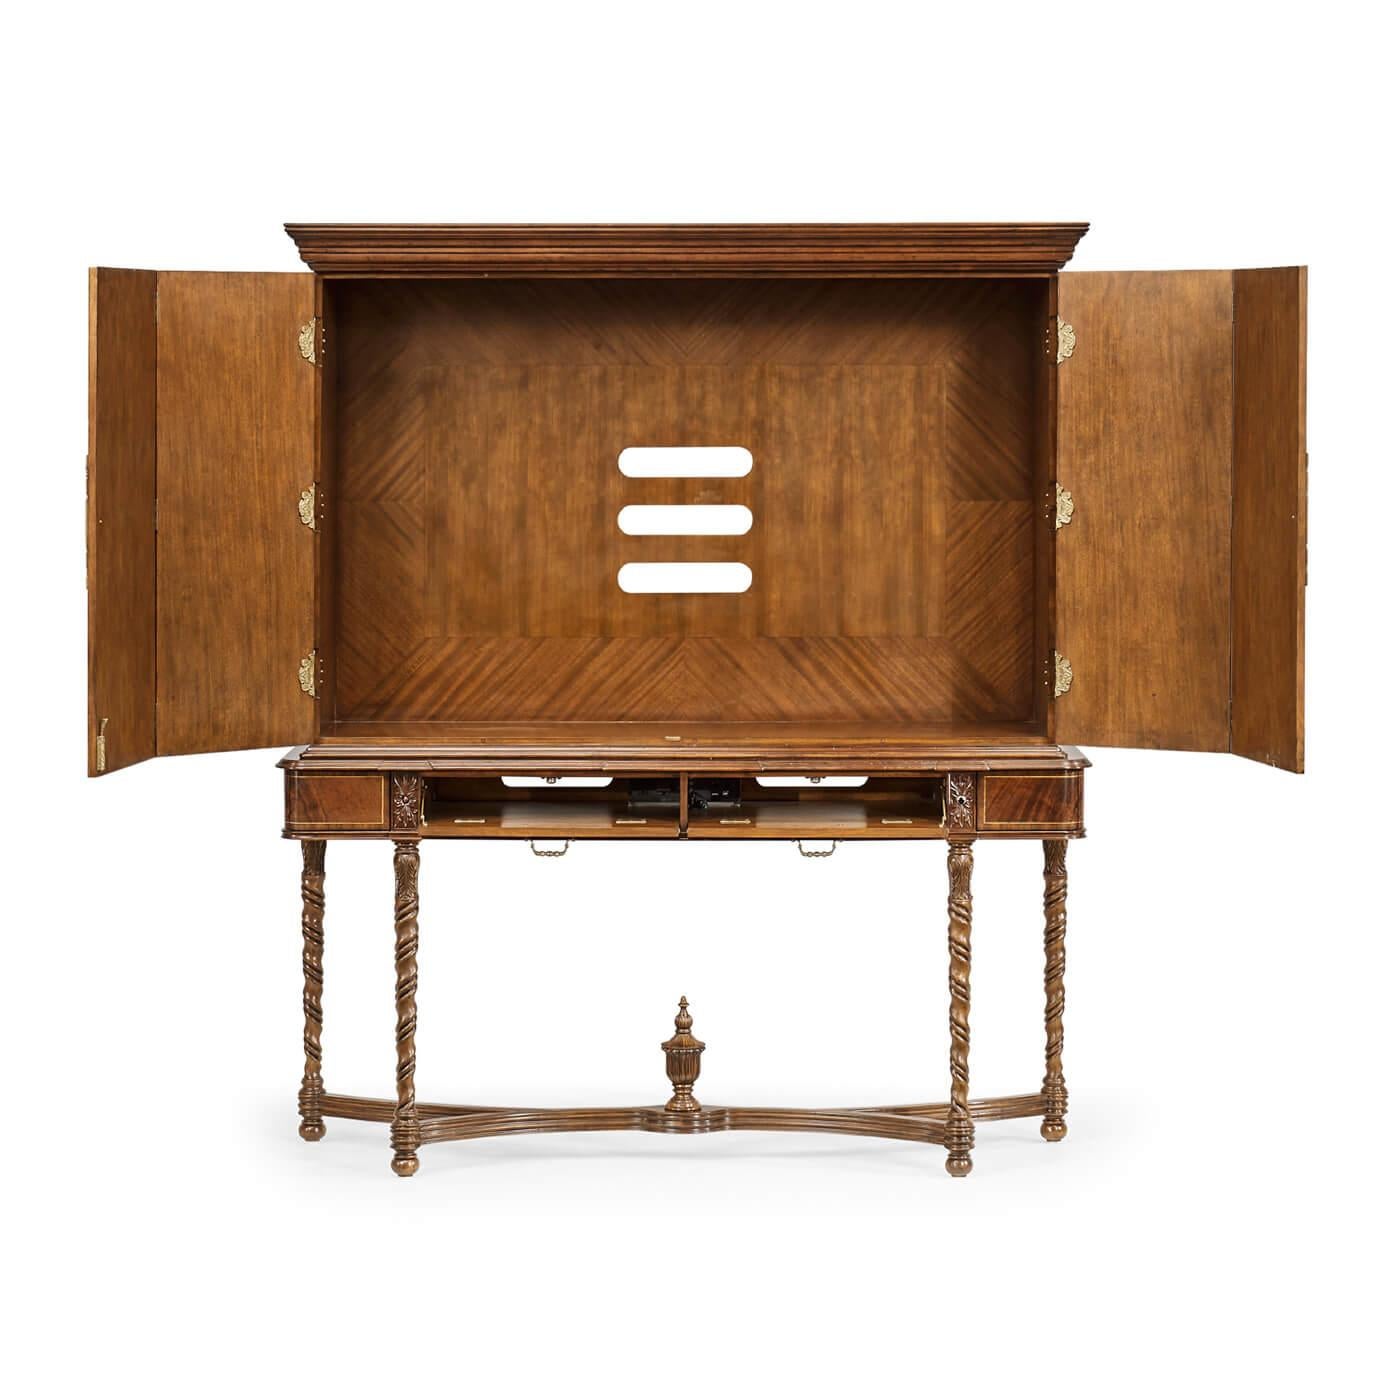 George III style crotch mahogany antique TV cabinet with four hinged doors, the veneers in a striking radiating pattern, set with finely cast patinated brass escutcheons, on a base with two drop-front drawers and turned column supports above